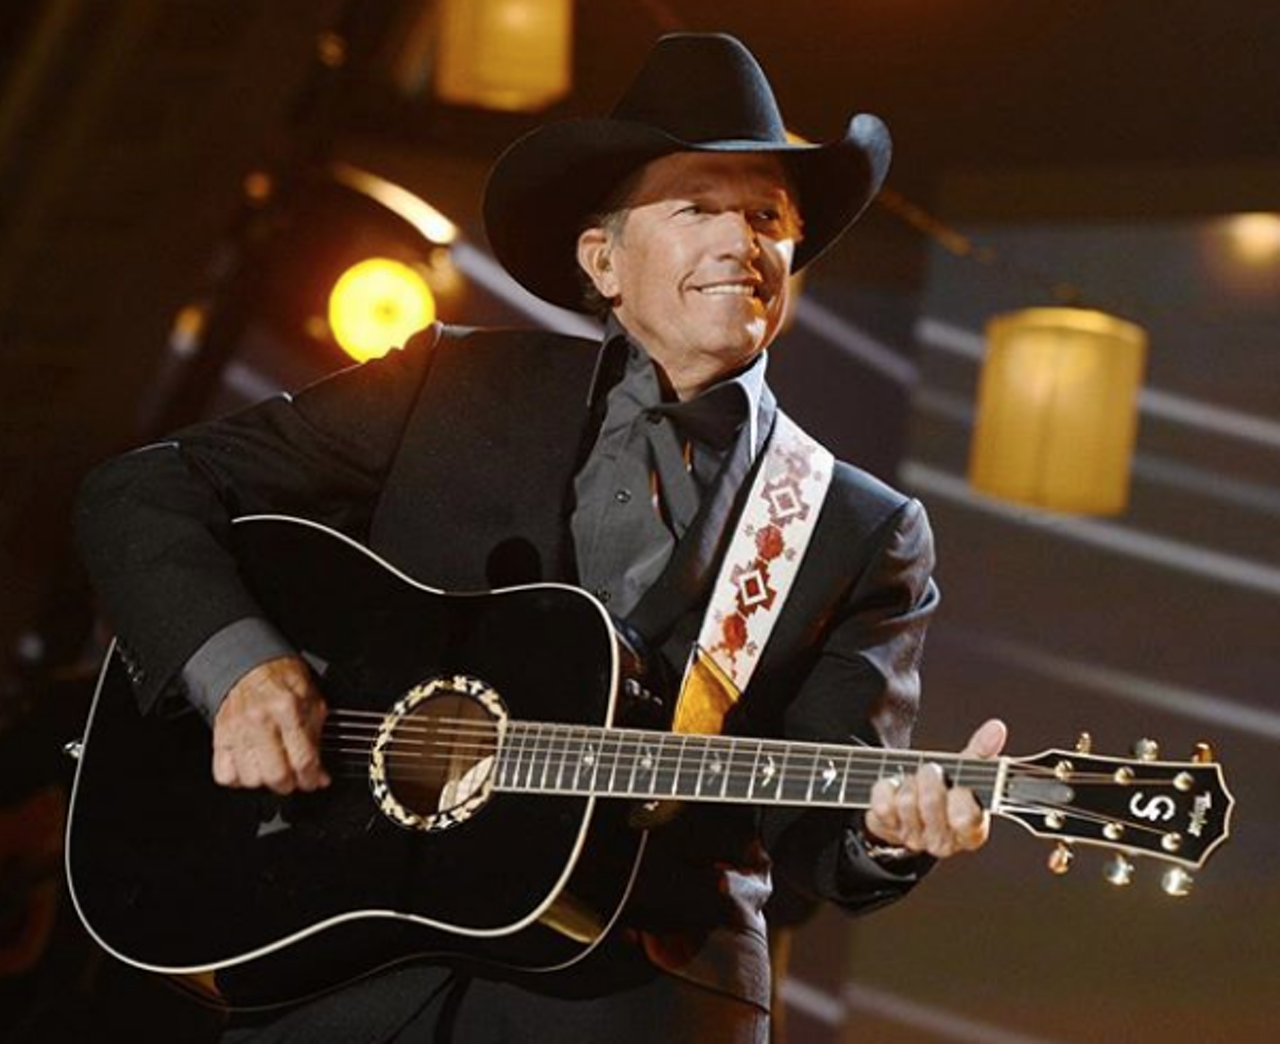 George Strait
If you’ve got all the swagger in the world, don a cream-colored cowboy hat and some brown cowboy boots, and you’ve got yourself a costume to be George Strait. Grab an old acoustic guitar if you can for the full effect.
Photo via Instagram / georgestrait